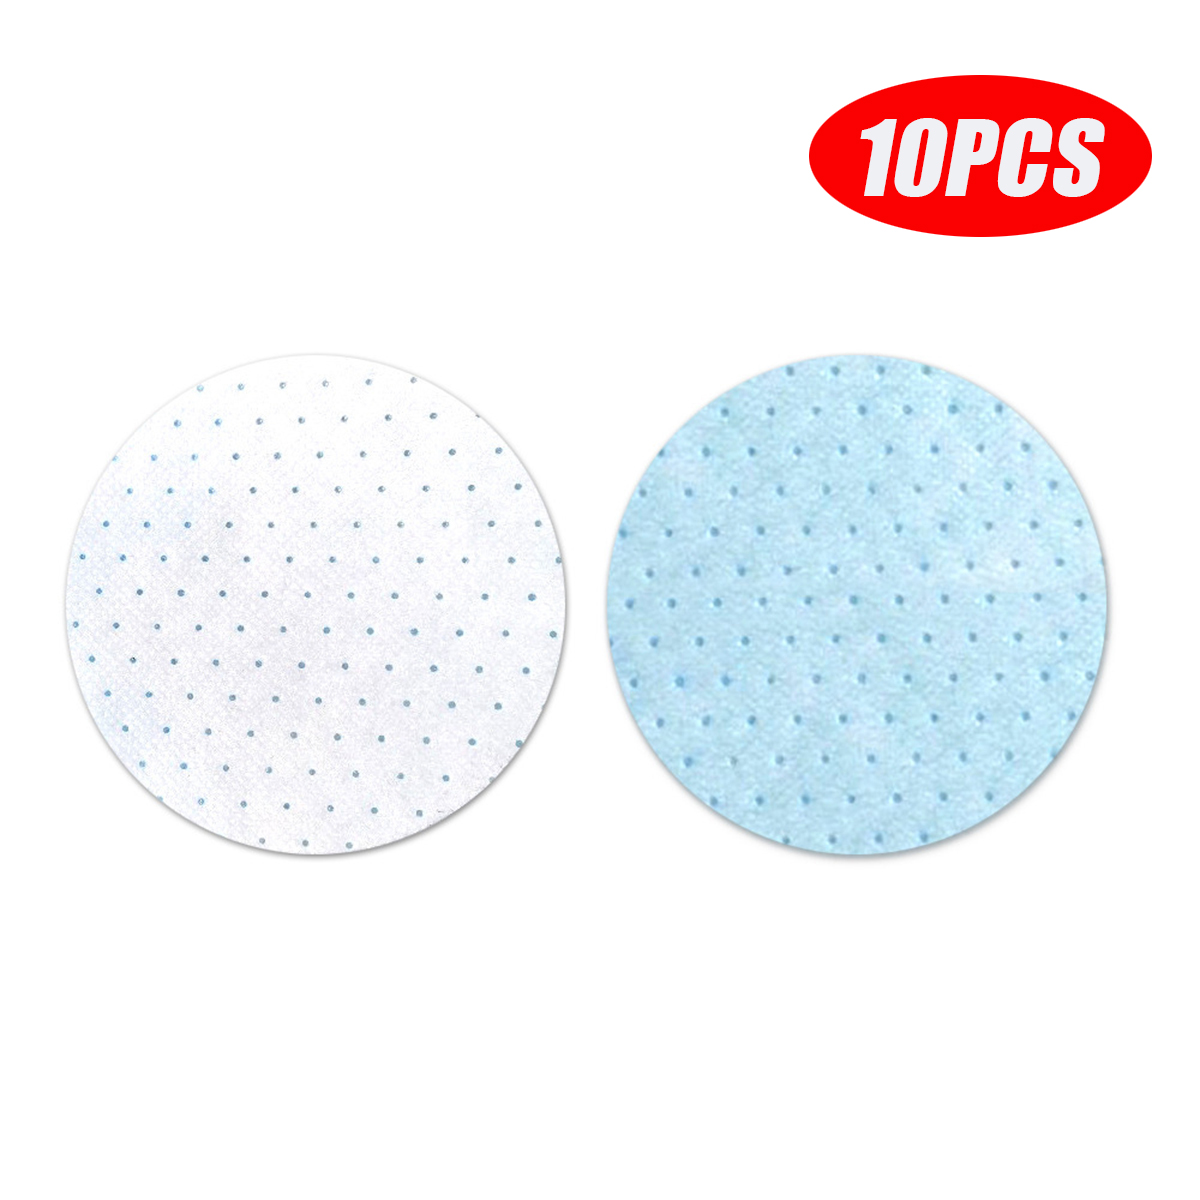 10Pcs-Disposable-Face-Mask-Gasket-Safety-Health-Care-Mouth-Face-Mask-Filter-Pad-1658535-10